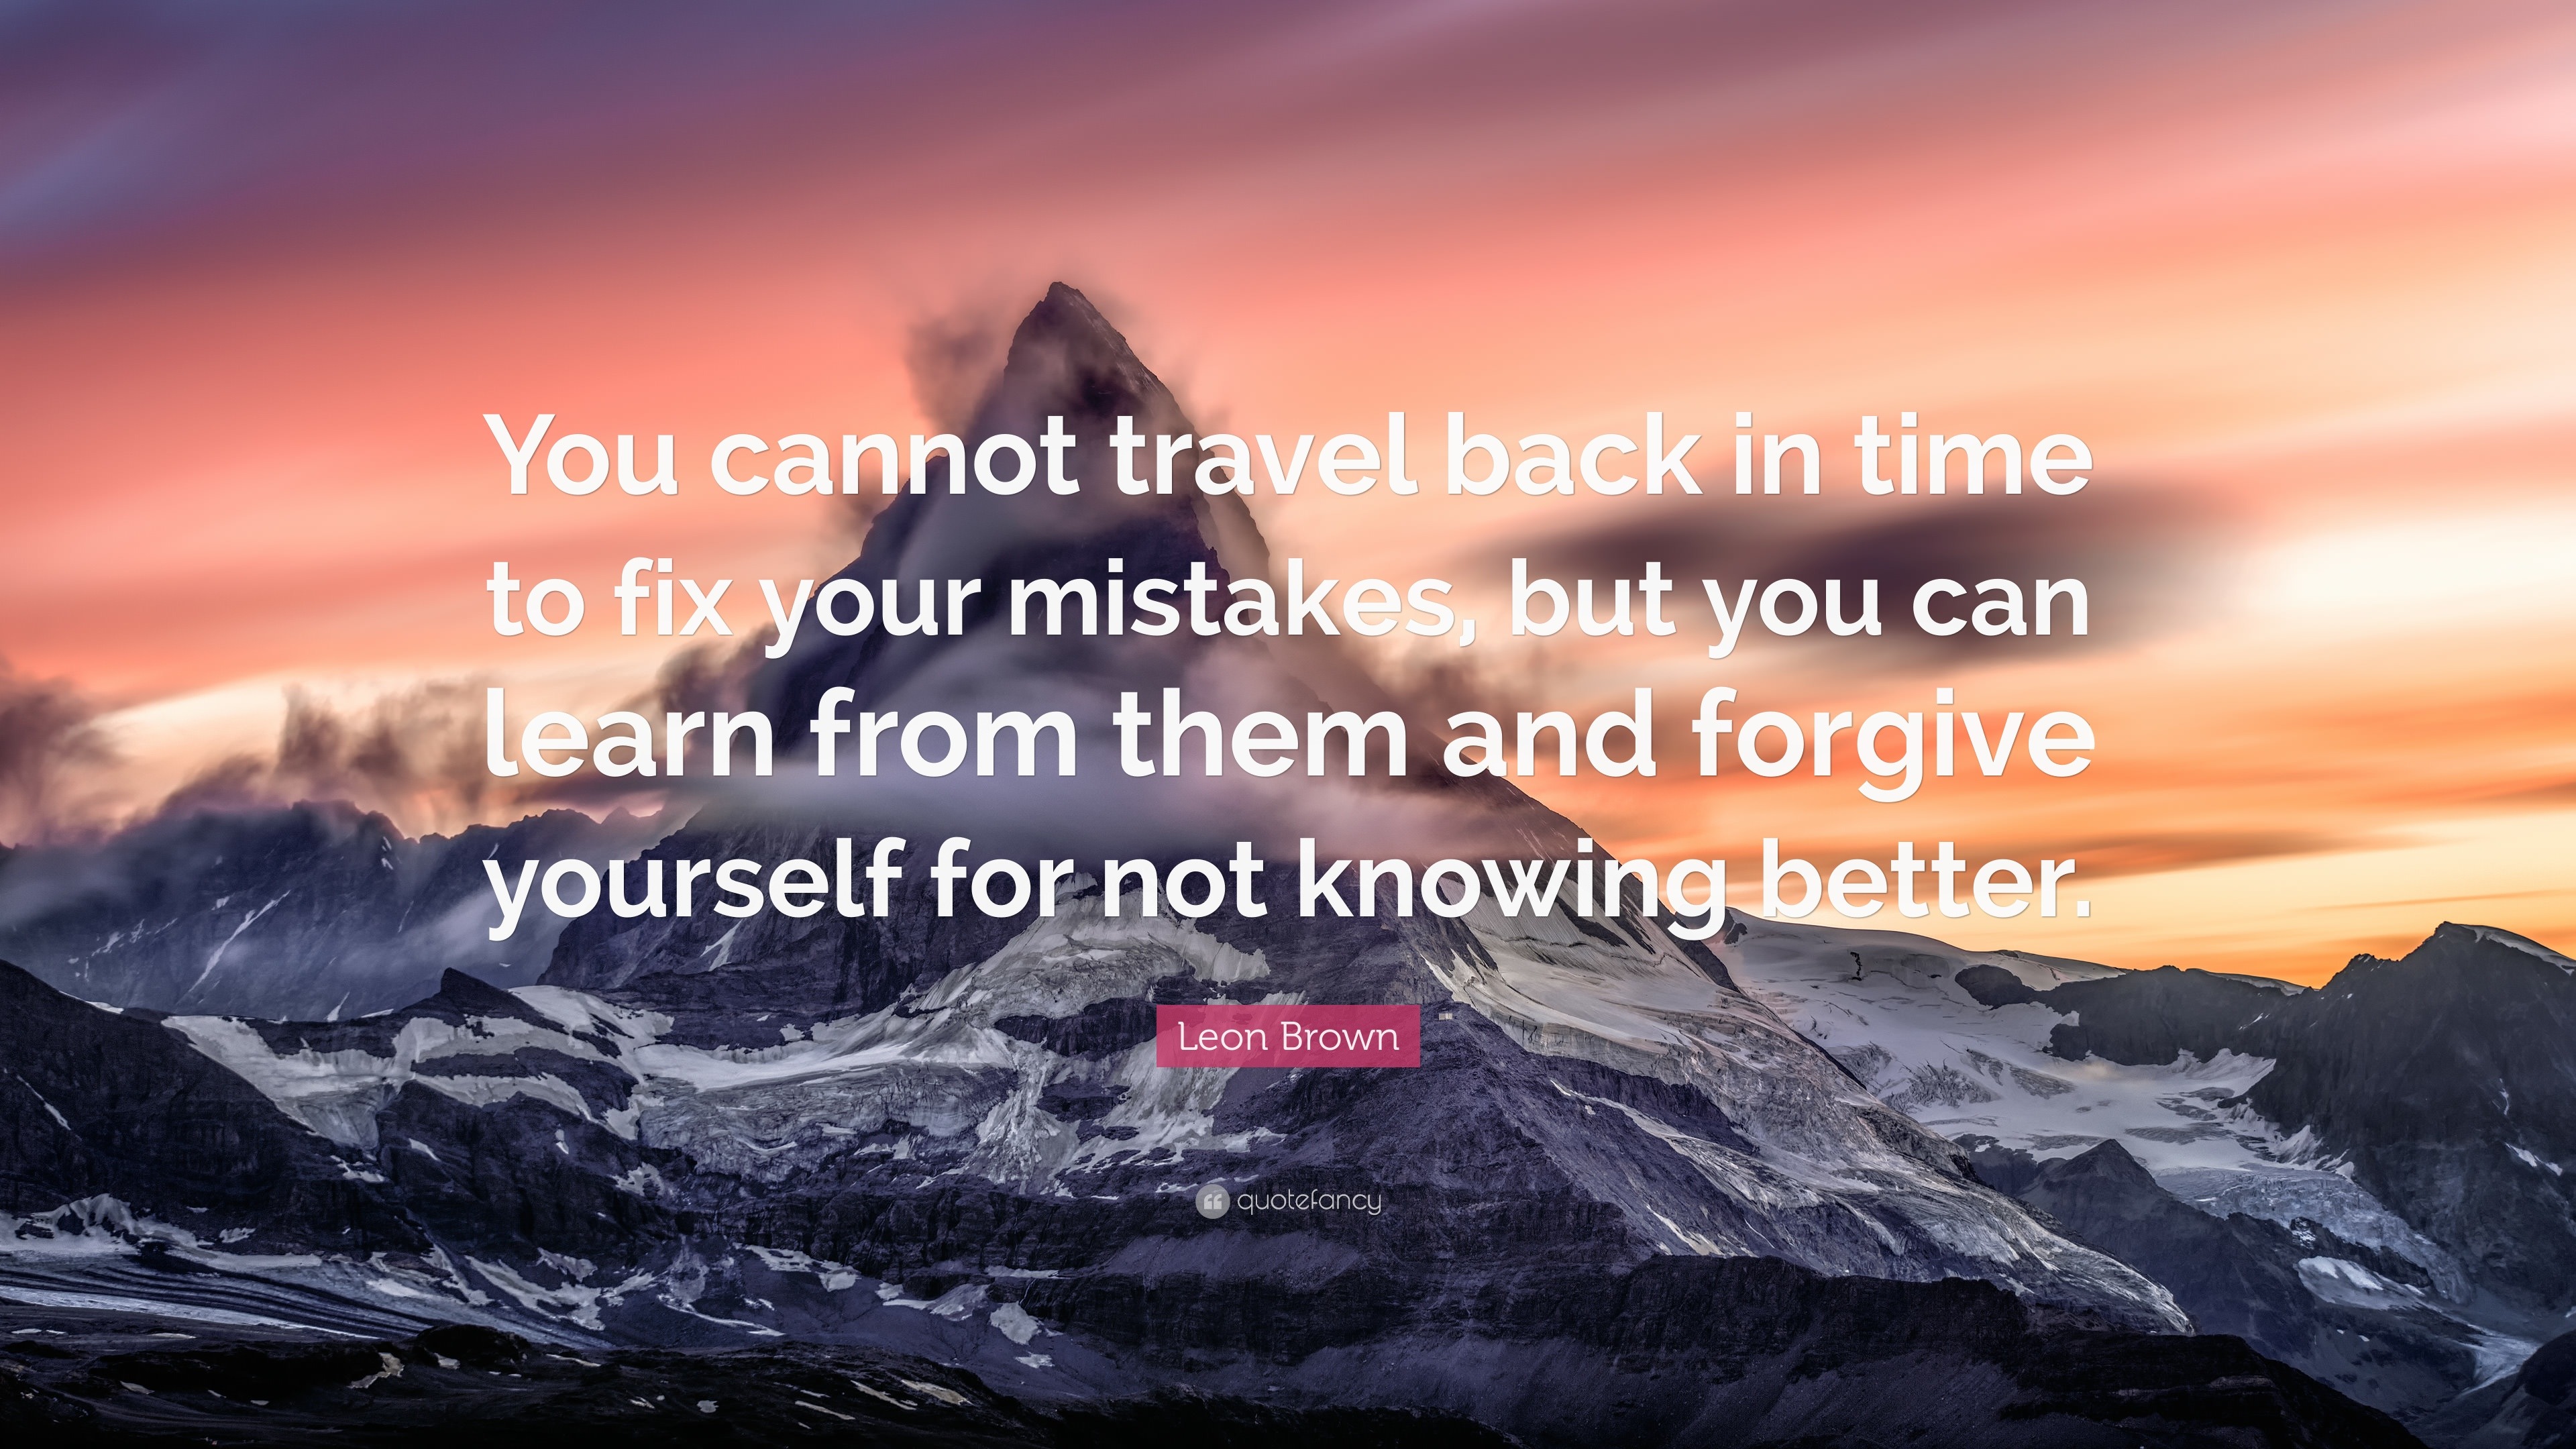 Leon Brown Quote You Cannot Travel Back In Time To Fix Your Mistakes But You Can Learn From Them And Forgive Yourself For Not Knowing Be 12 Wallpapers Quotefancy